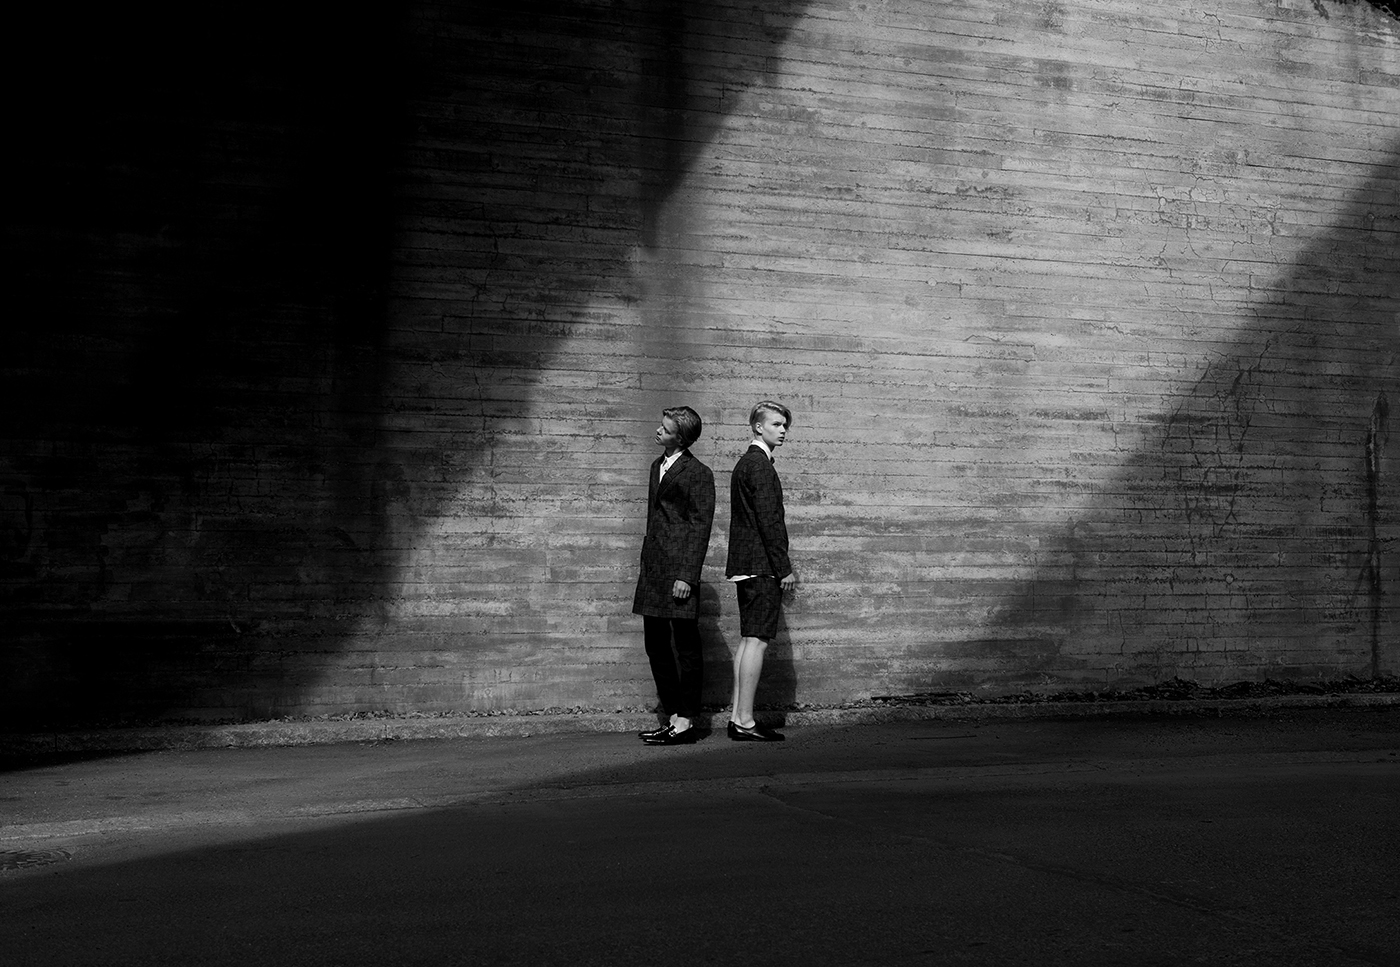 A black and white portrait of two young men standing next to a wall